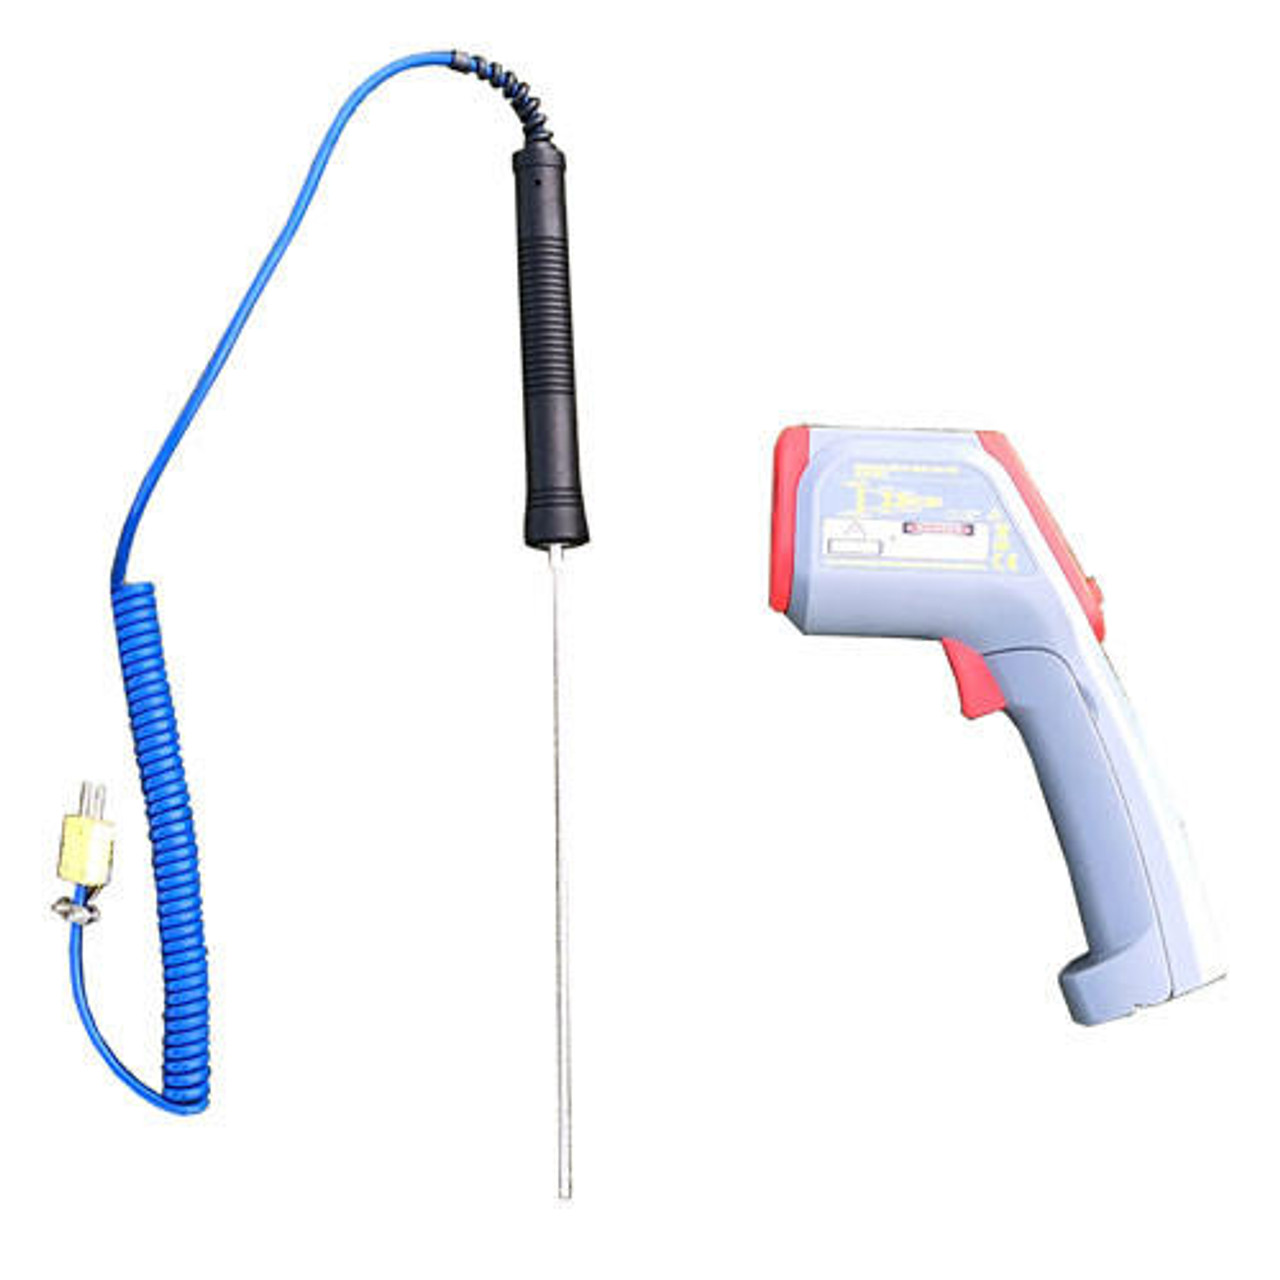 Infrared Thermometer - ArmorPoxy Flooring Products